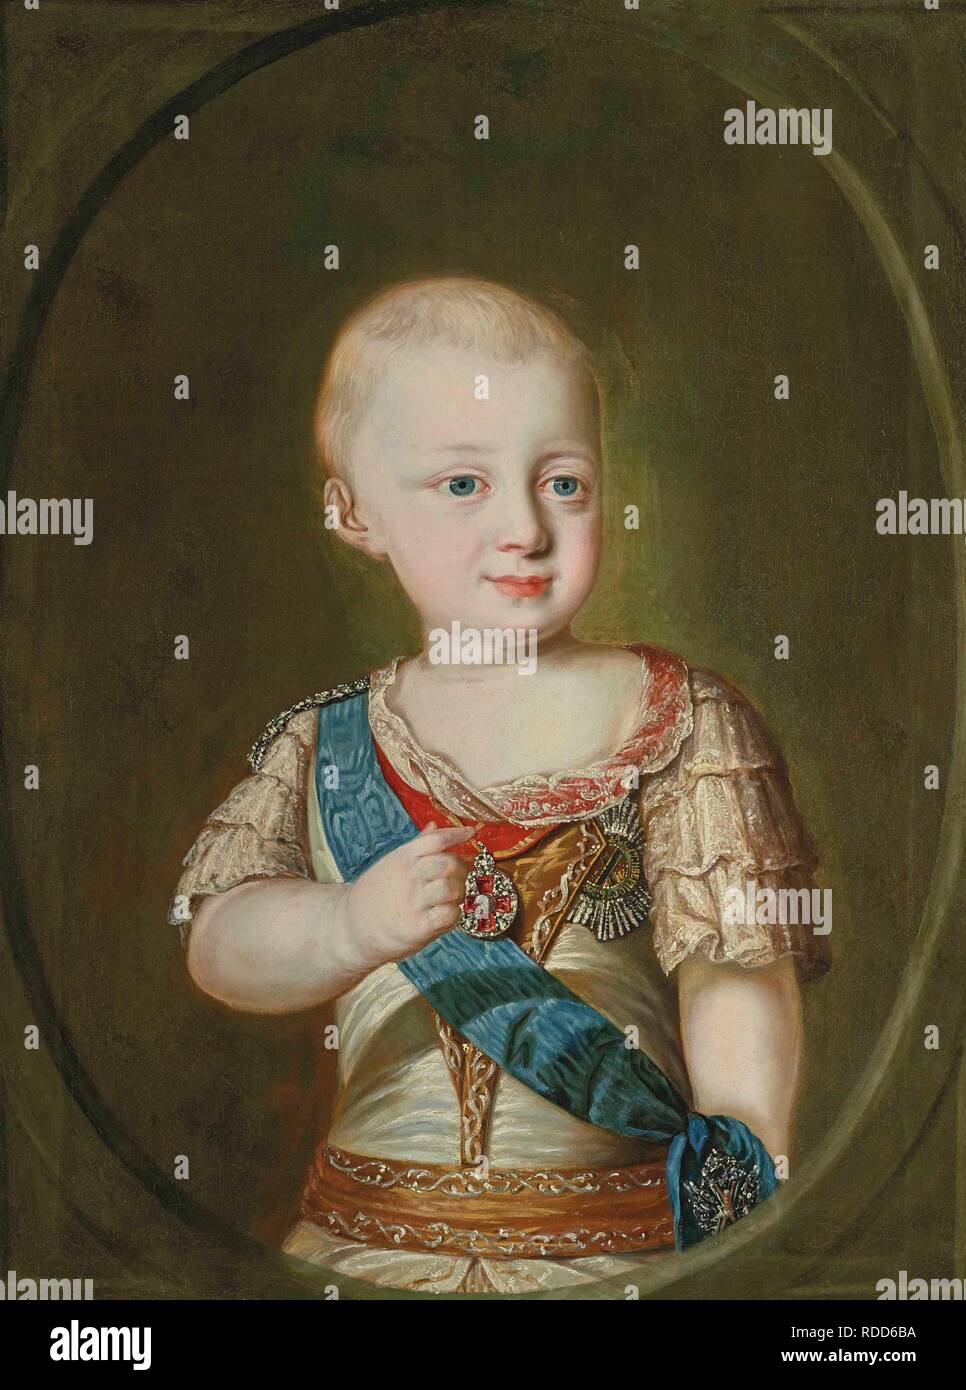 Portrait of Grand Duke Constantine Pavlovich of Russia (1779-1831) as child. Museum: PRIVATE COLLECTION. Author: ANONYMOUS. Stock Photo